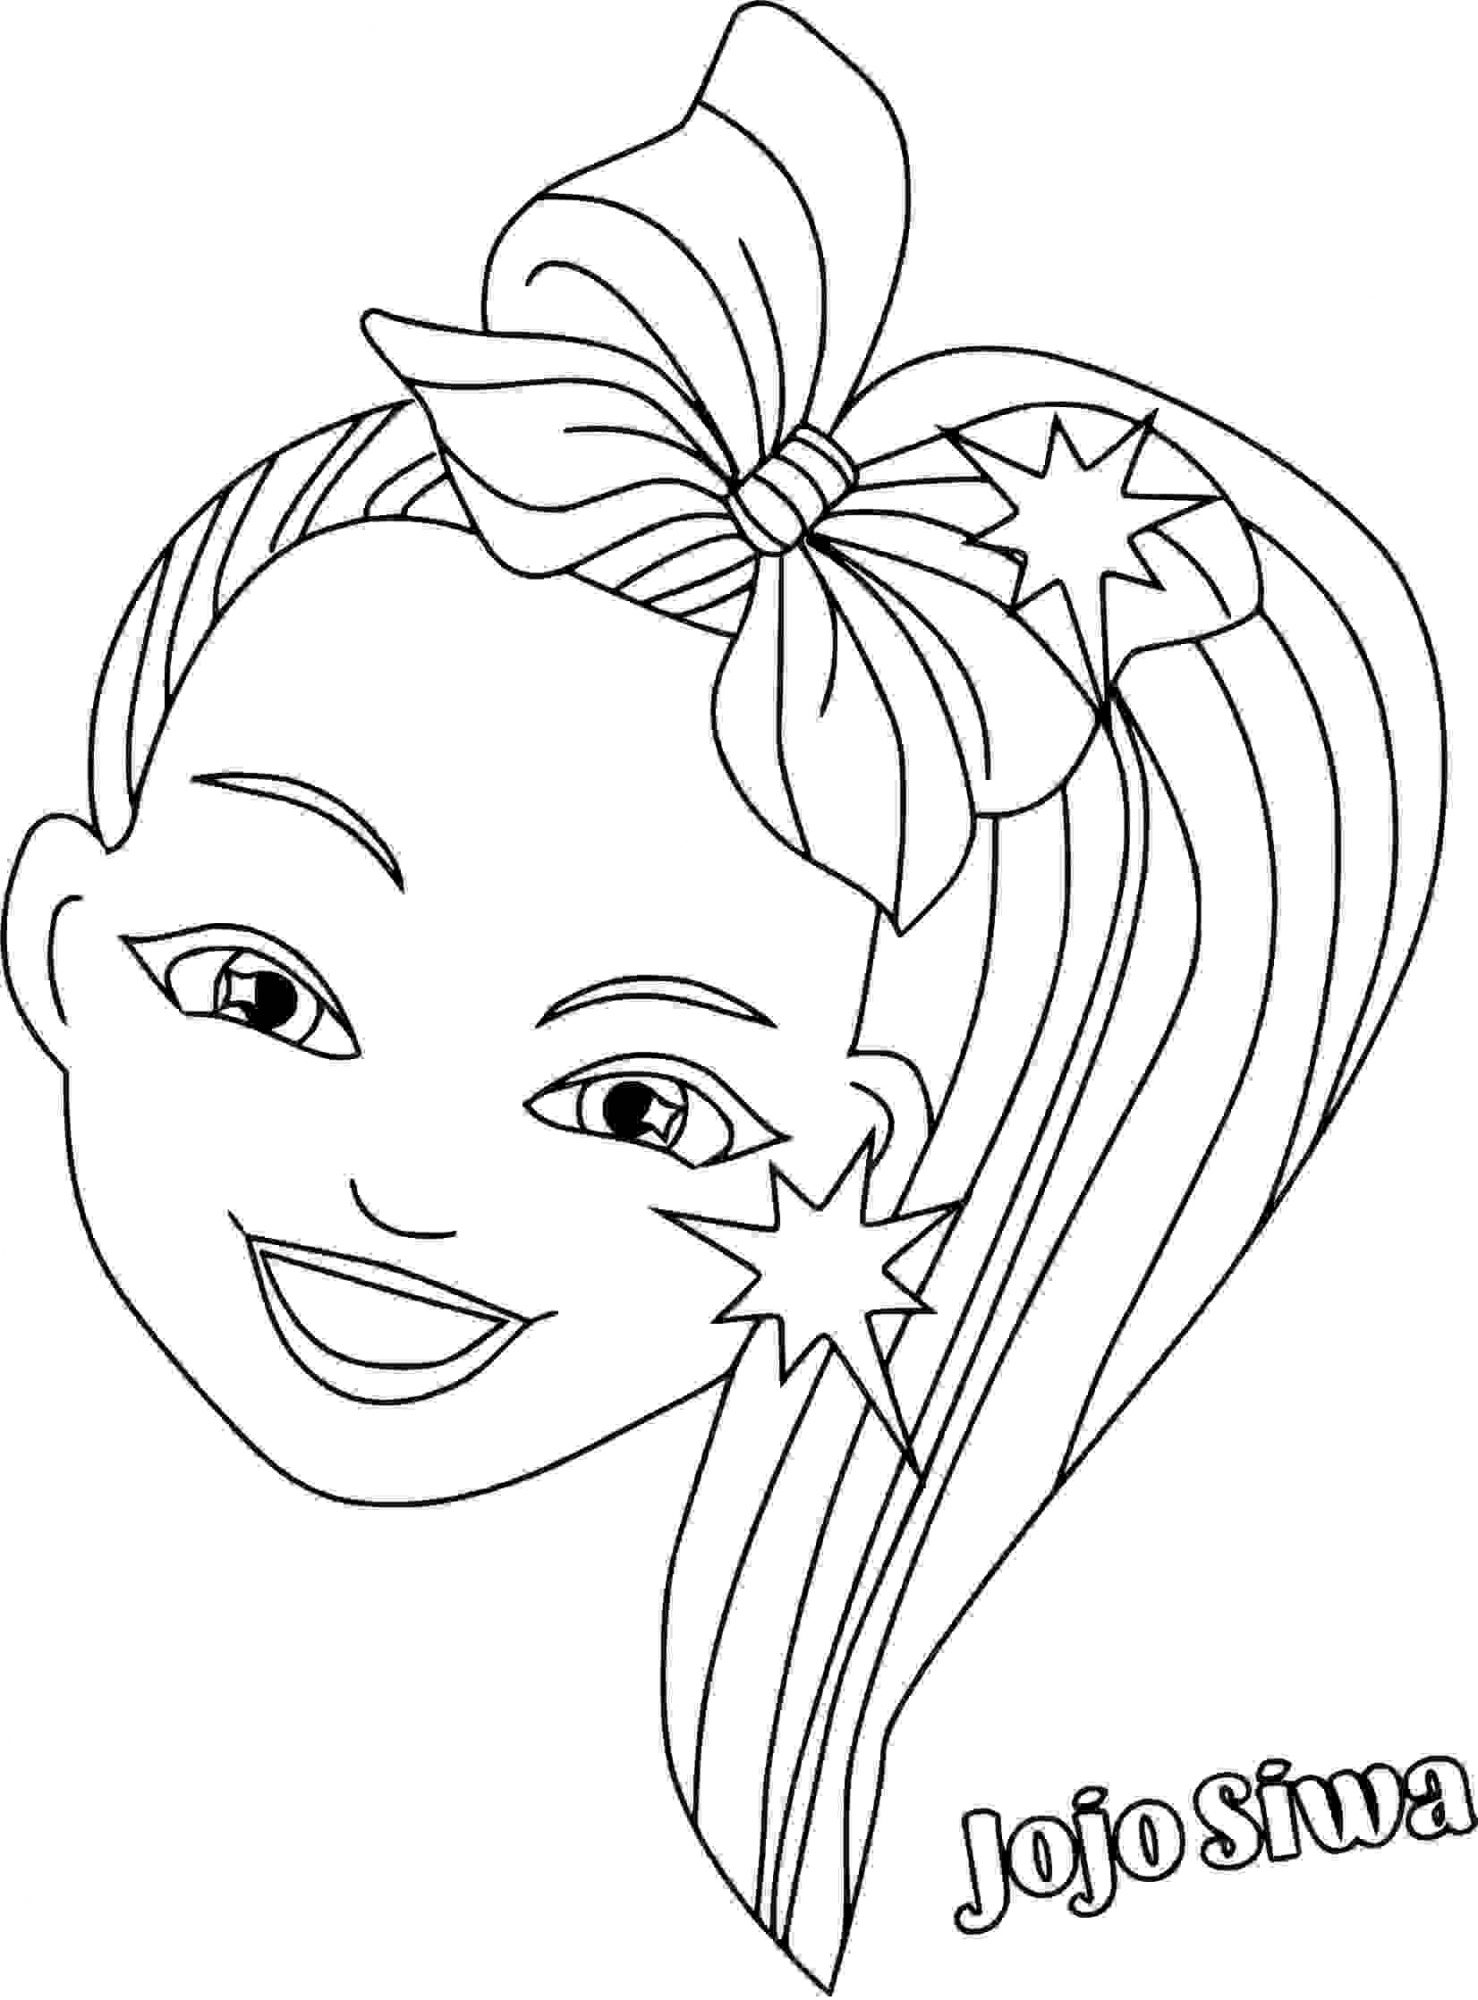 Head of Jojo Siwa with colorful hair Coloring Pages